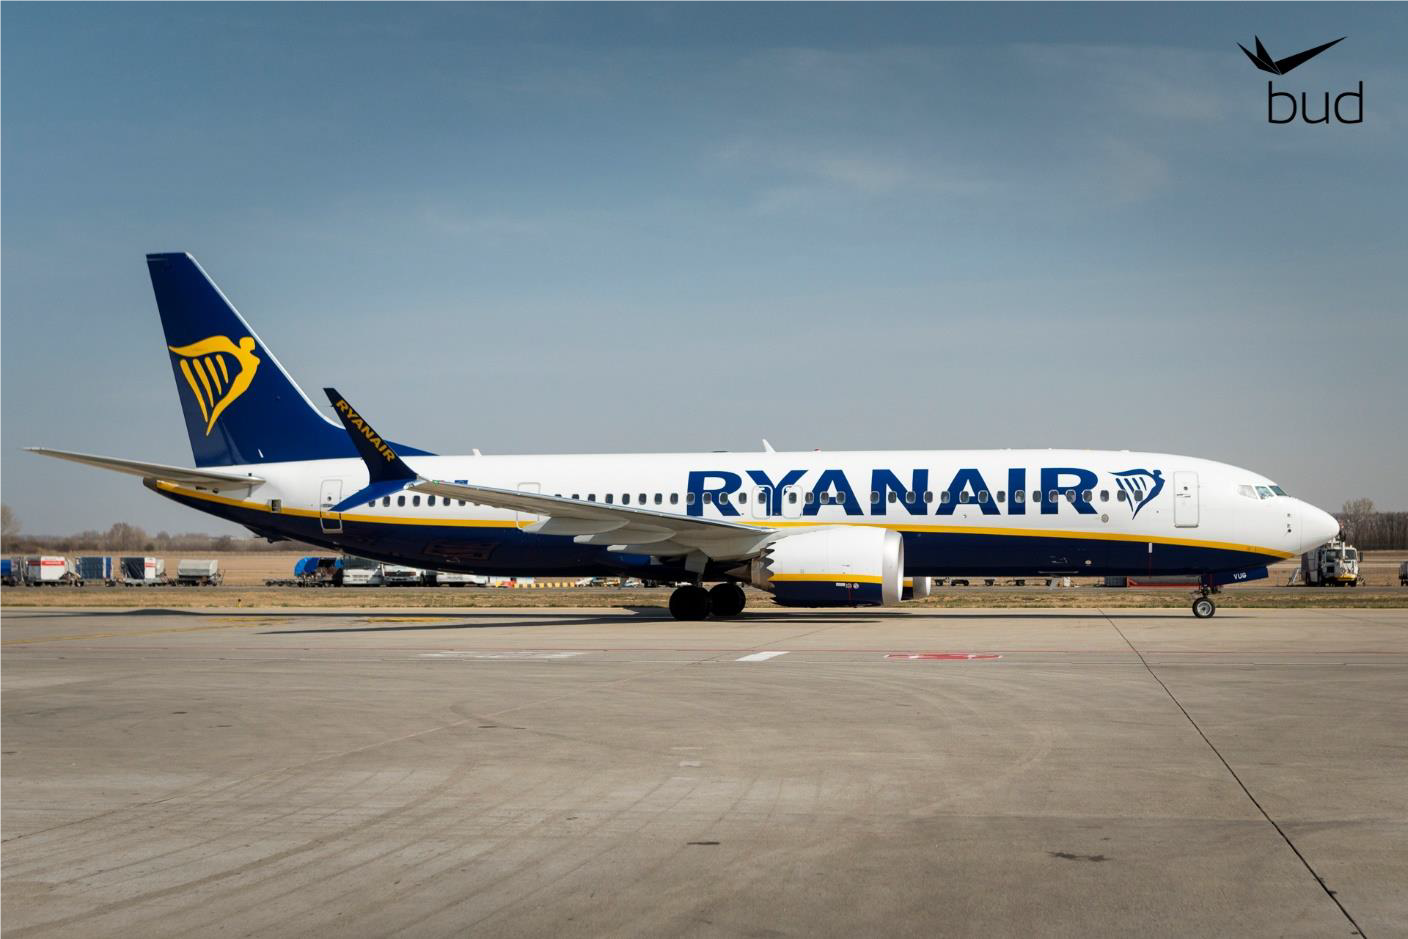 TUI will send off package tour customers from some countries with Ryanair